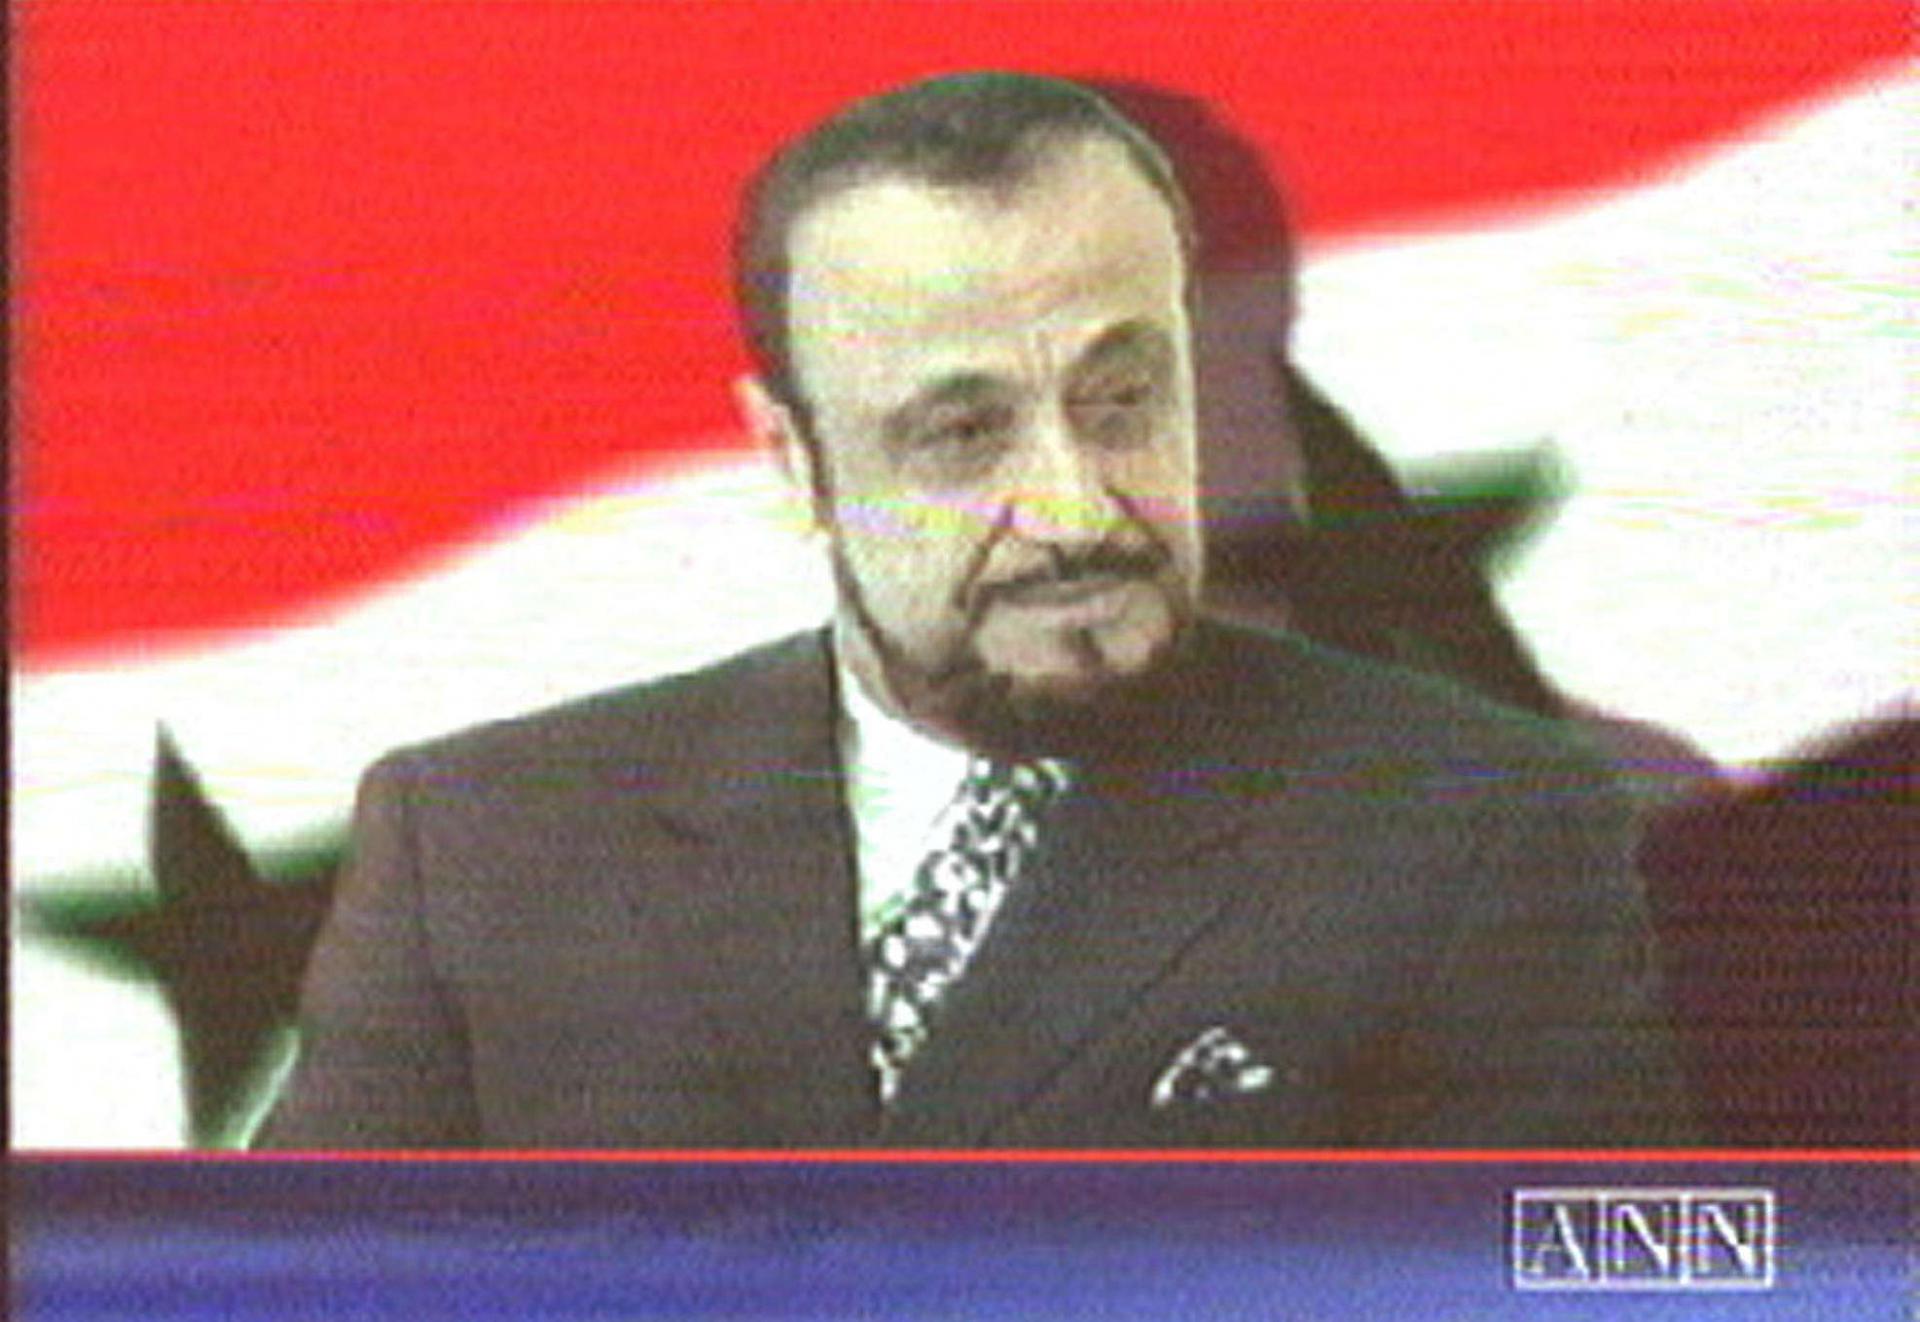 A file TV grab made on June 12, 2000 shows a photo of Rifaat al-Assad, the exiled brother of Syria's late Preisdent Hafez al-Assad, as it appeared on June 12, 2000 on the London-based Arab News Network (ANN) television station, which belongs to his son Sumer.